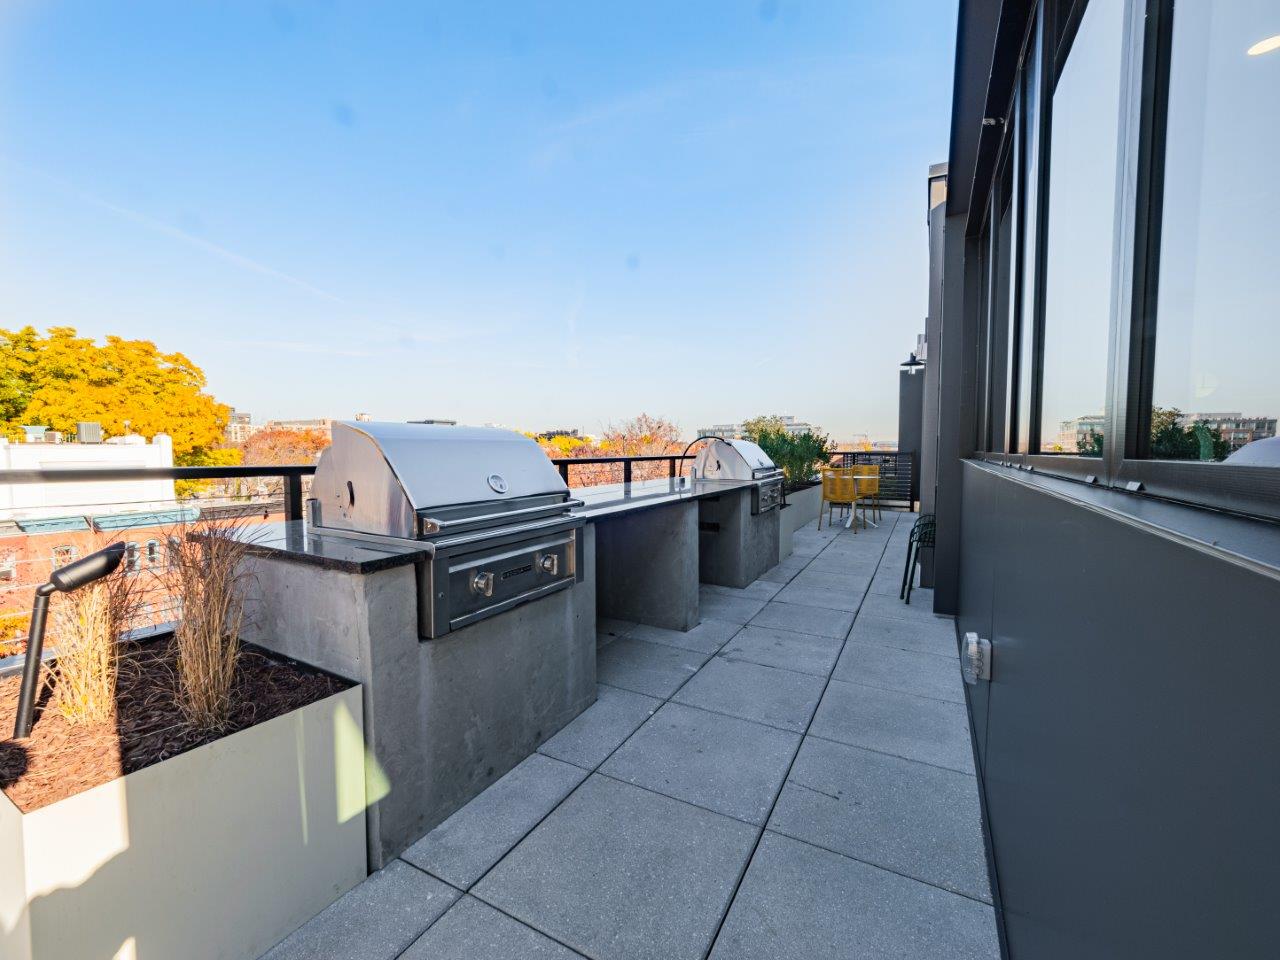 Capitol Rose Luxury Apartments in Washington, DC Rooftop Patio with BBQ's